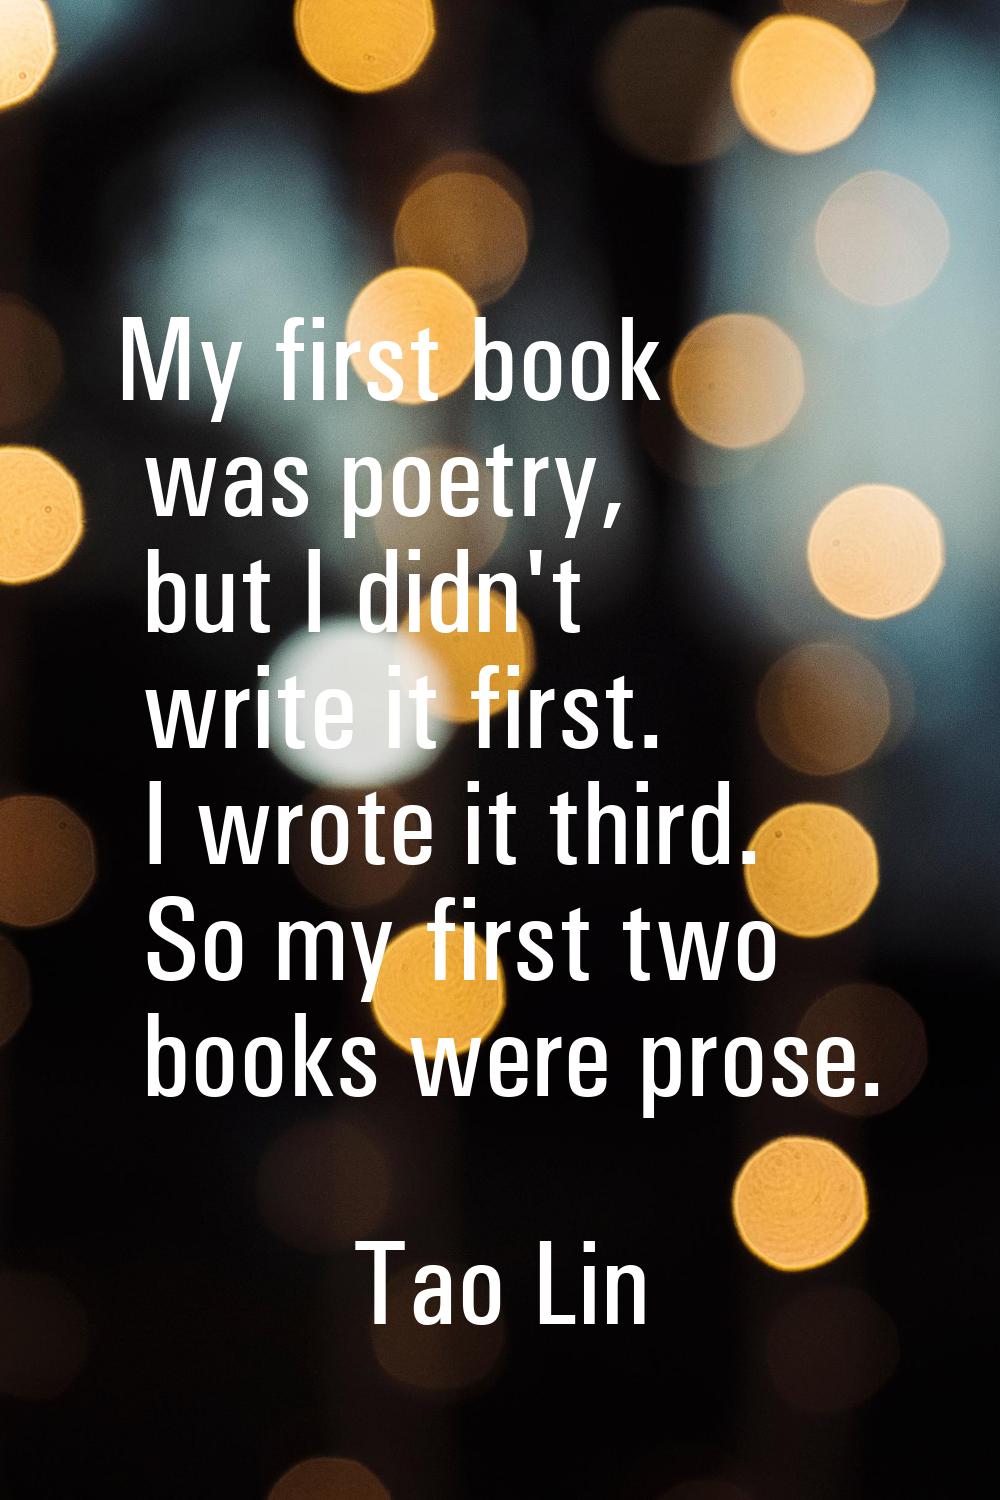 My first book was poetry, but I didn't write it first. I wrote it third. So my first two books were